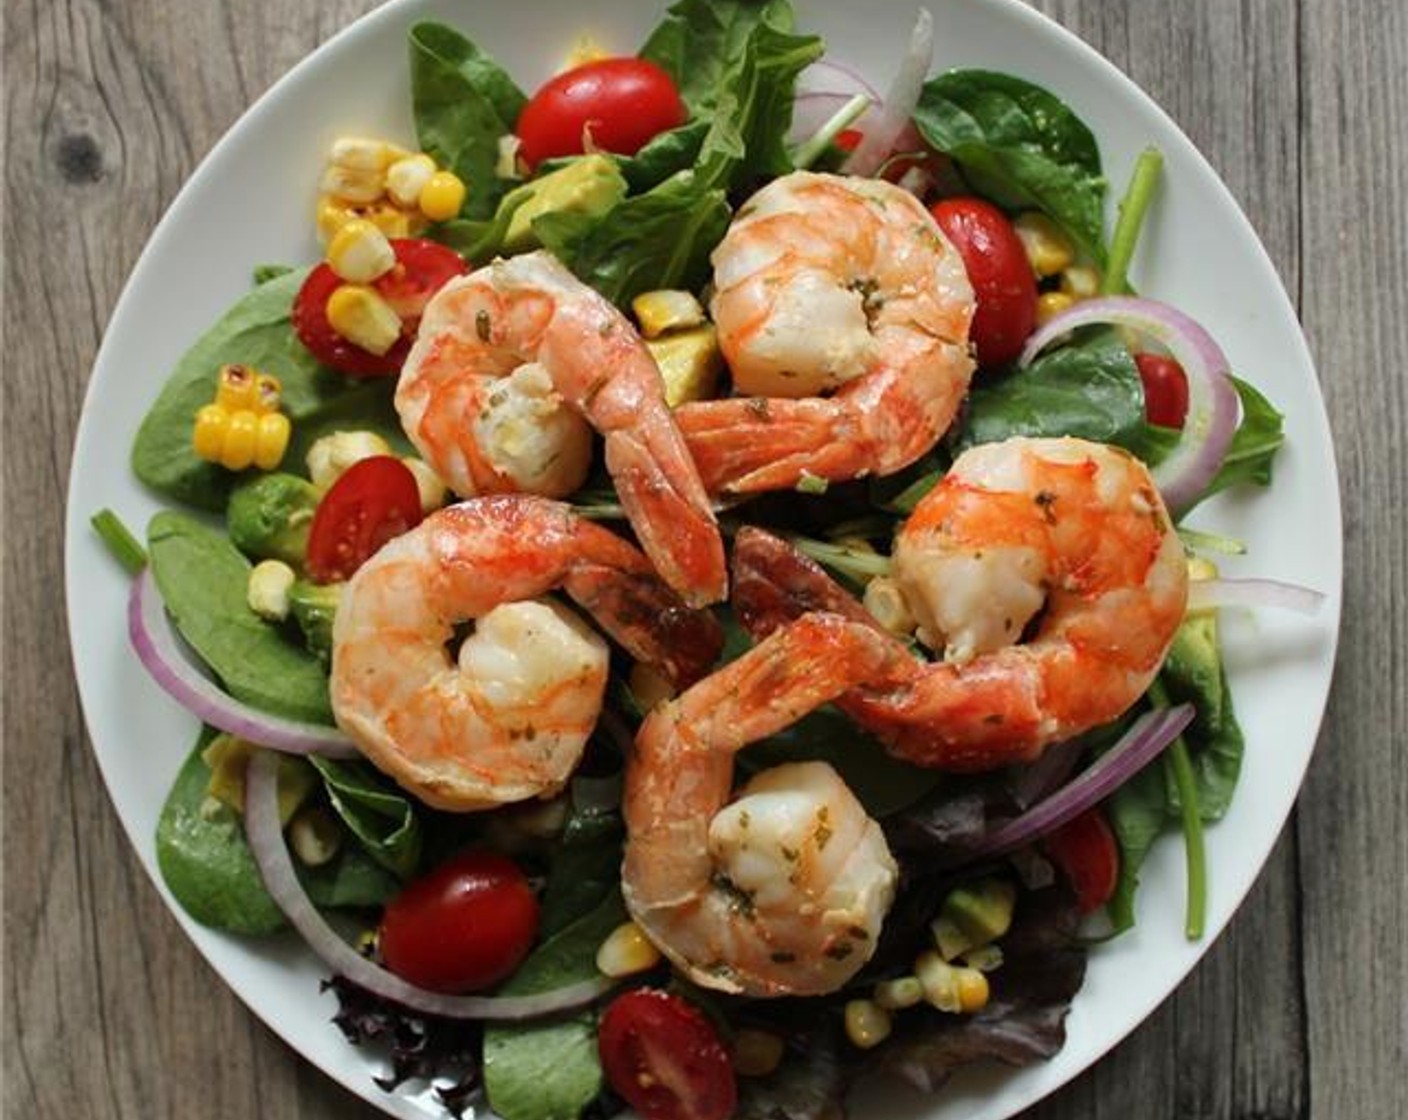 Summer Salad with Avocado, Corn and Grilled Shrimp